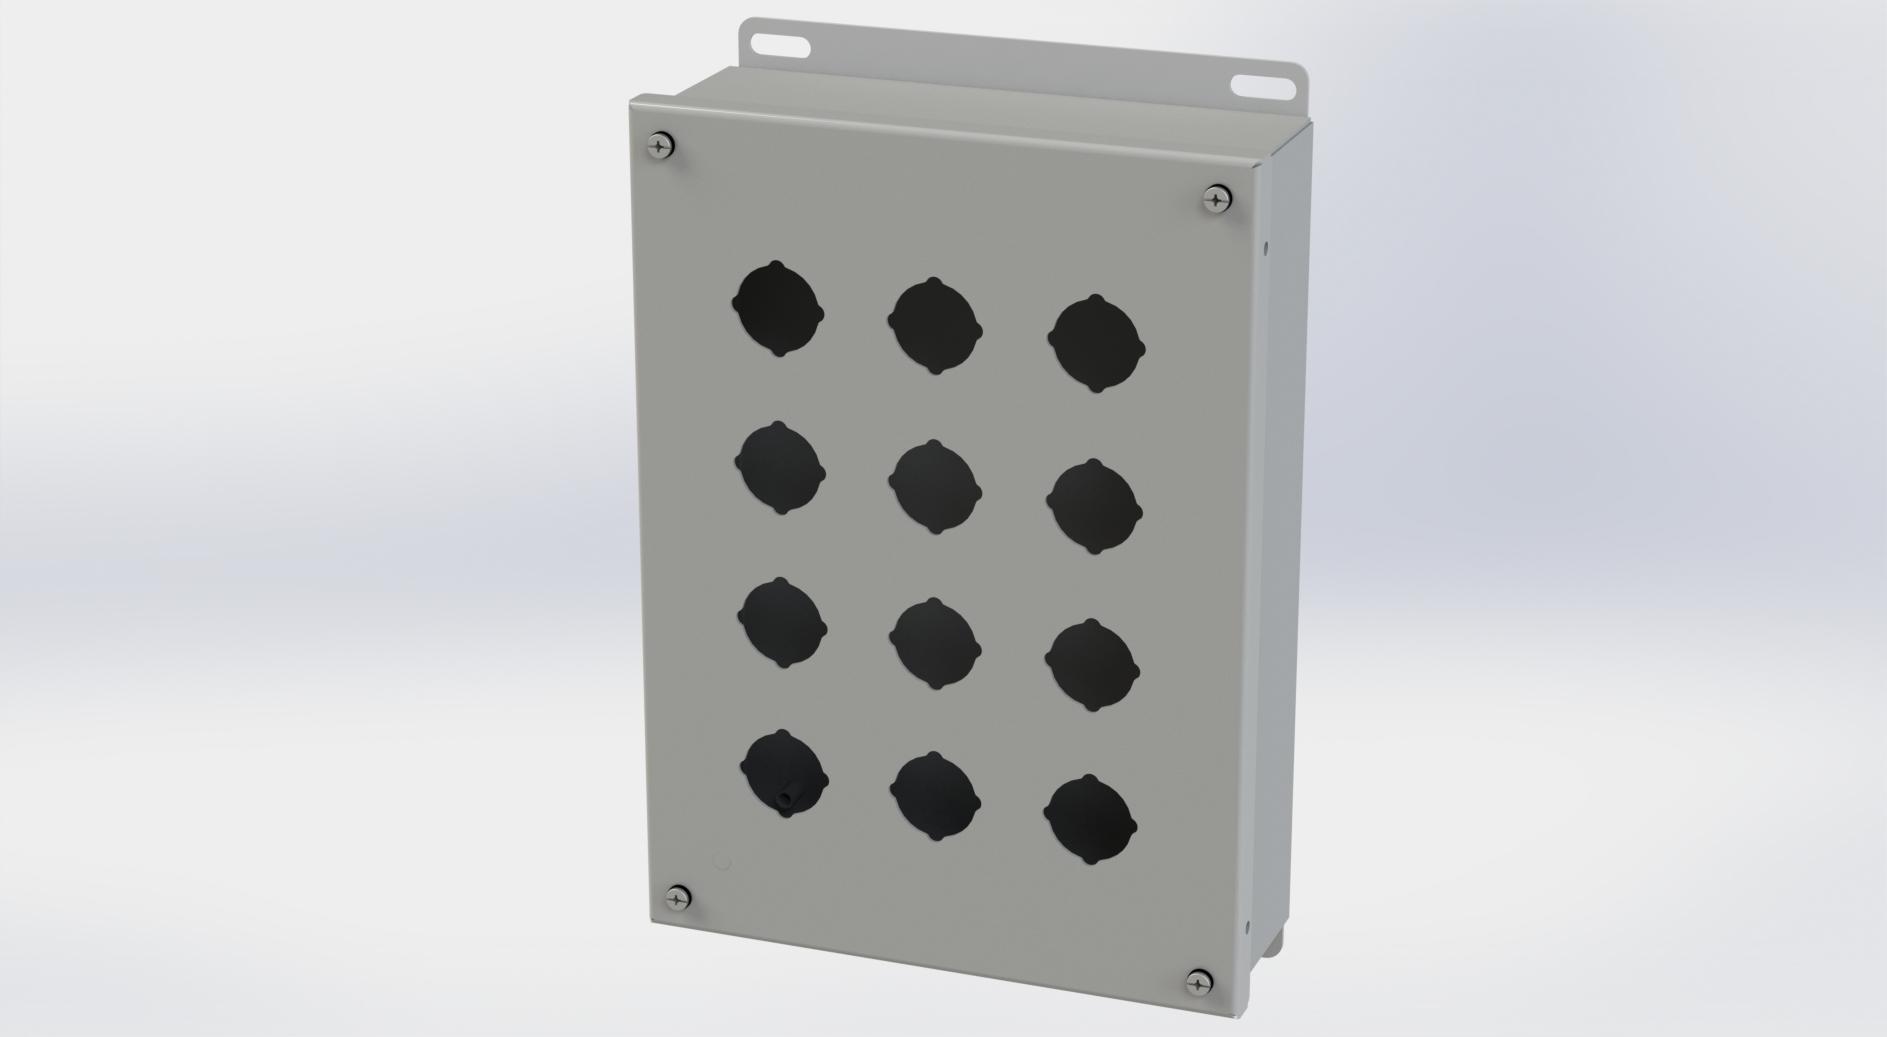 Saginaw Control SCE-12PB PB Enclosure, Height:11.75", Width:8.50", Depth:3.00", ANSI-61 gray powder coating inside and out.